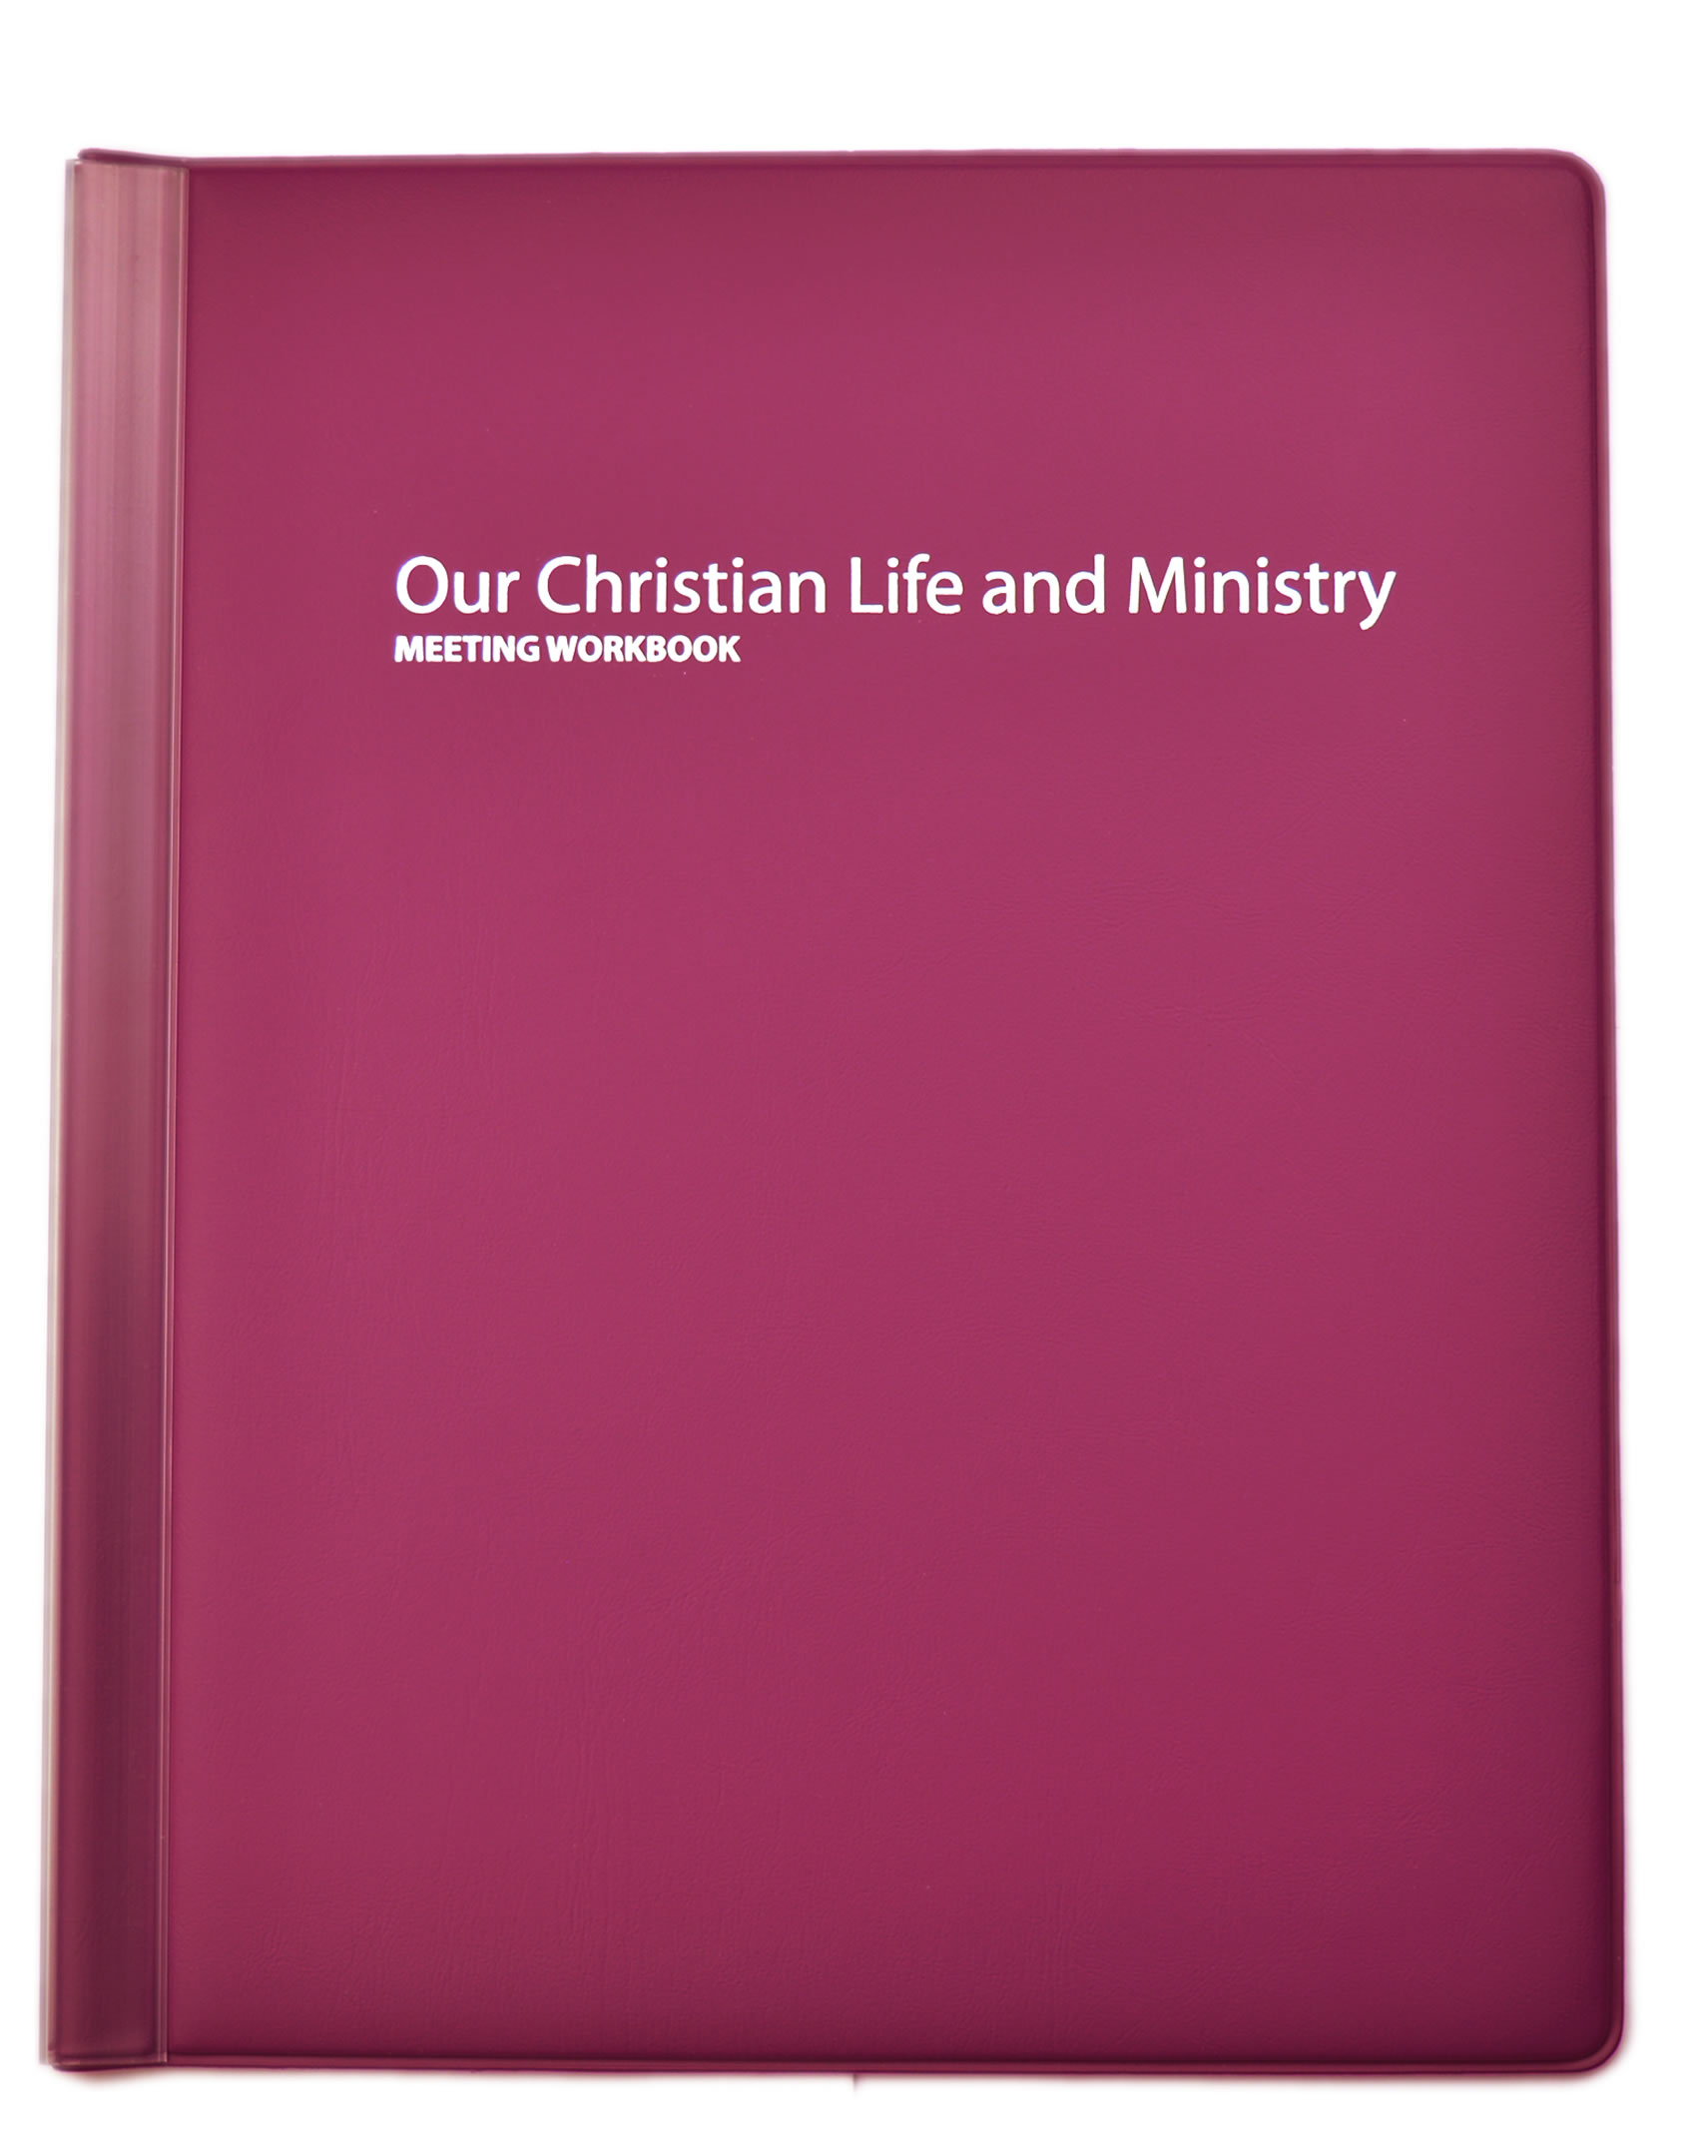 NEW - Our Christian Life and Ministry Meeting Workbook Folder - PLUM  - PLUM